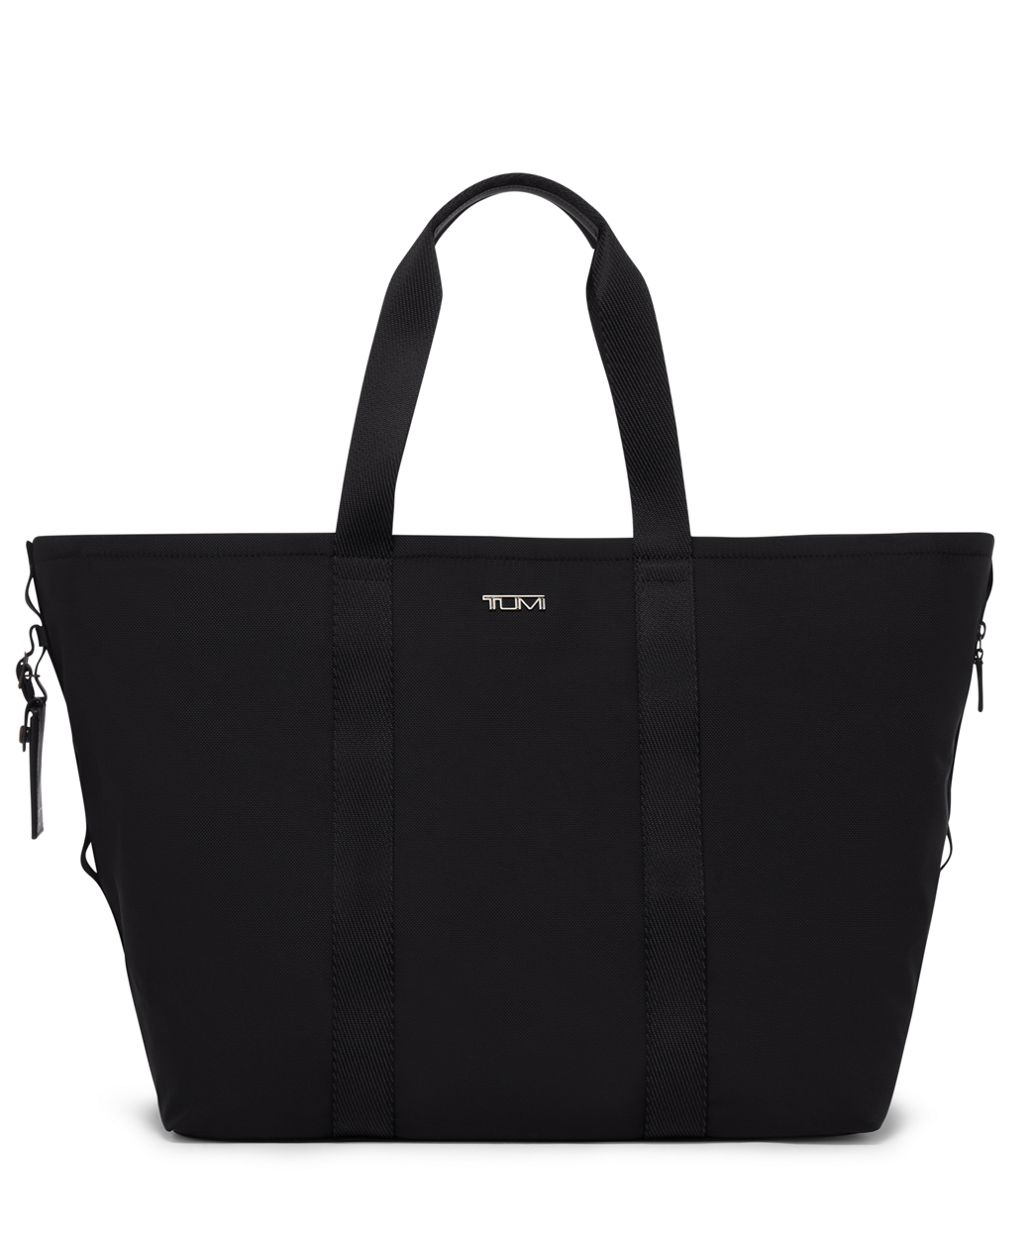 I love this Modern Tote in Grey - Thirty-One Gifts